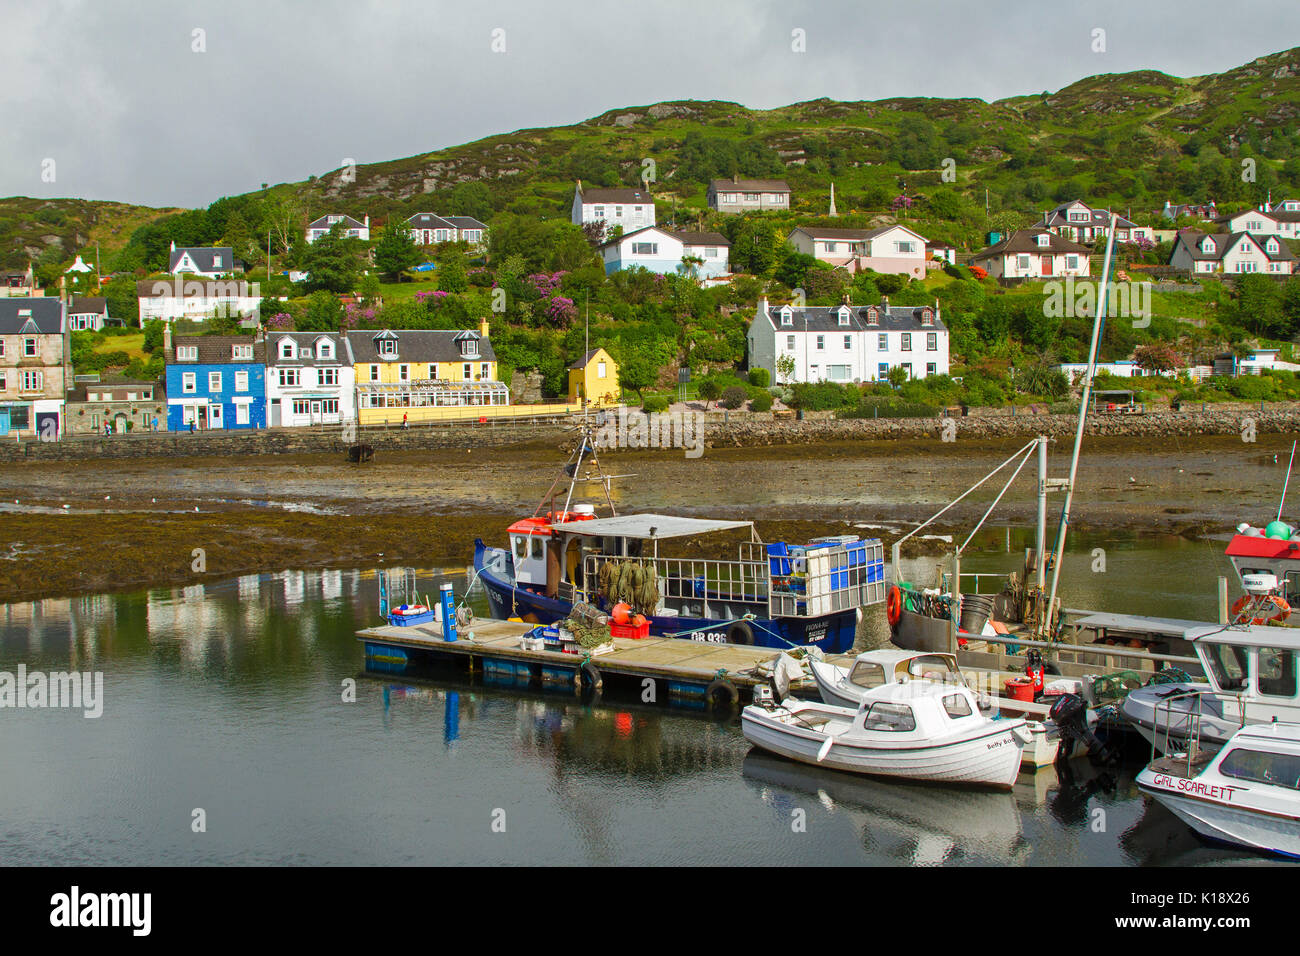 Scottish village of Tarbert with colourful buildings at foot of wooded hills and boats in harbour on Loch Tarbert, Scotland Stock Photo